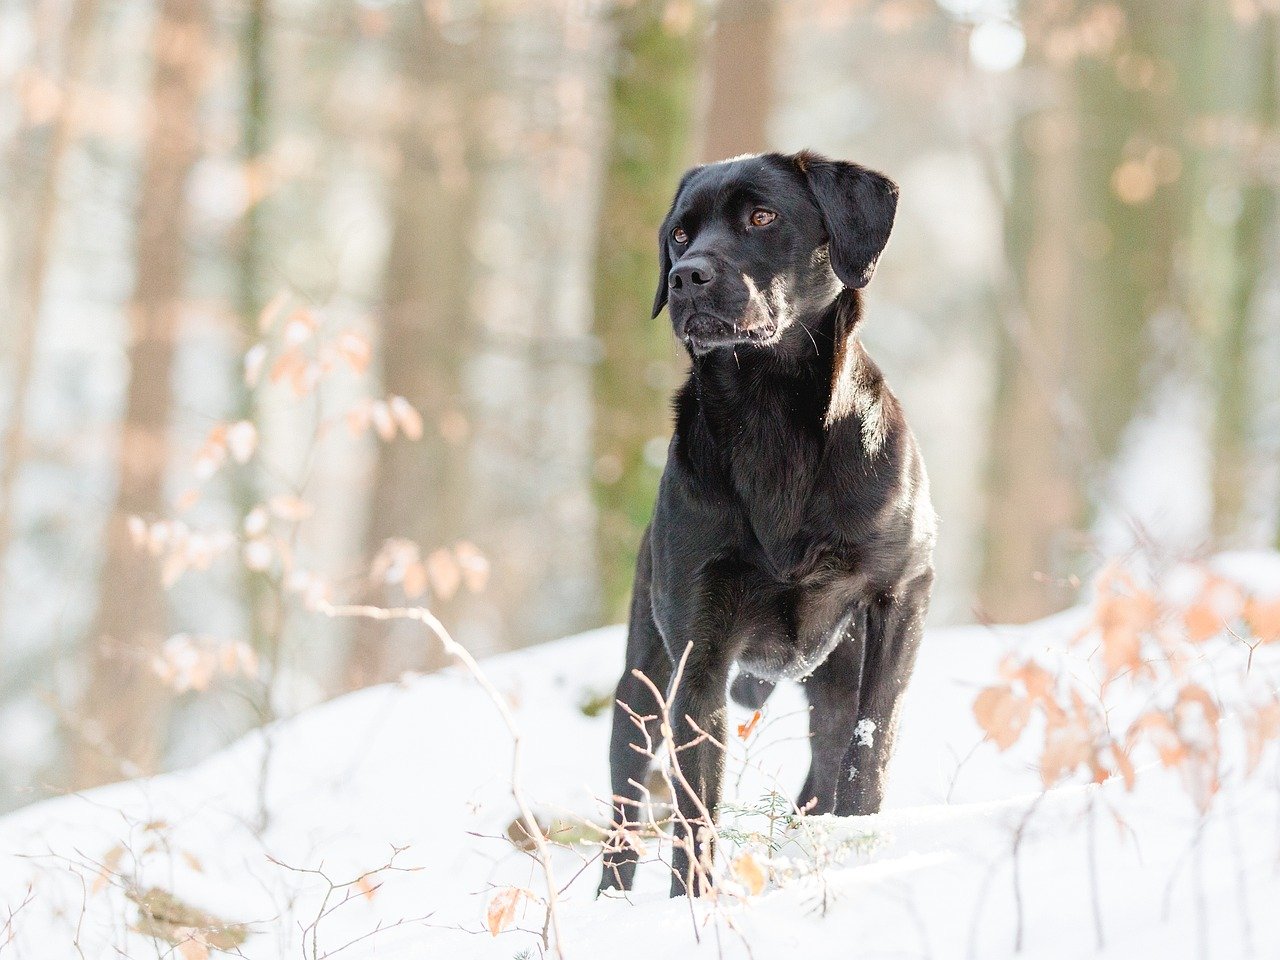 Black Lab outside in a forest with snow.